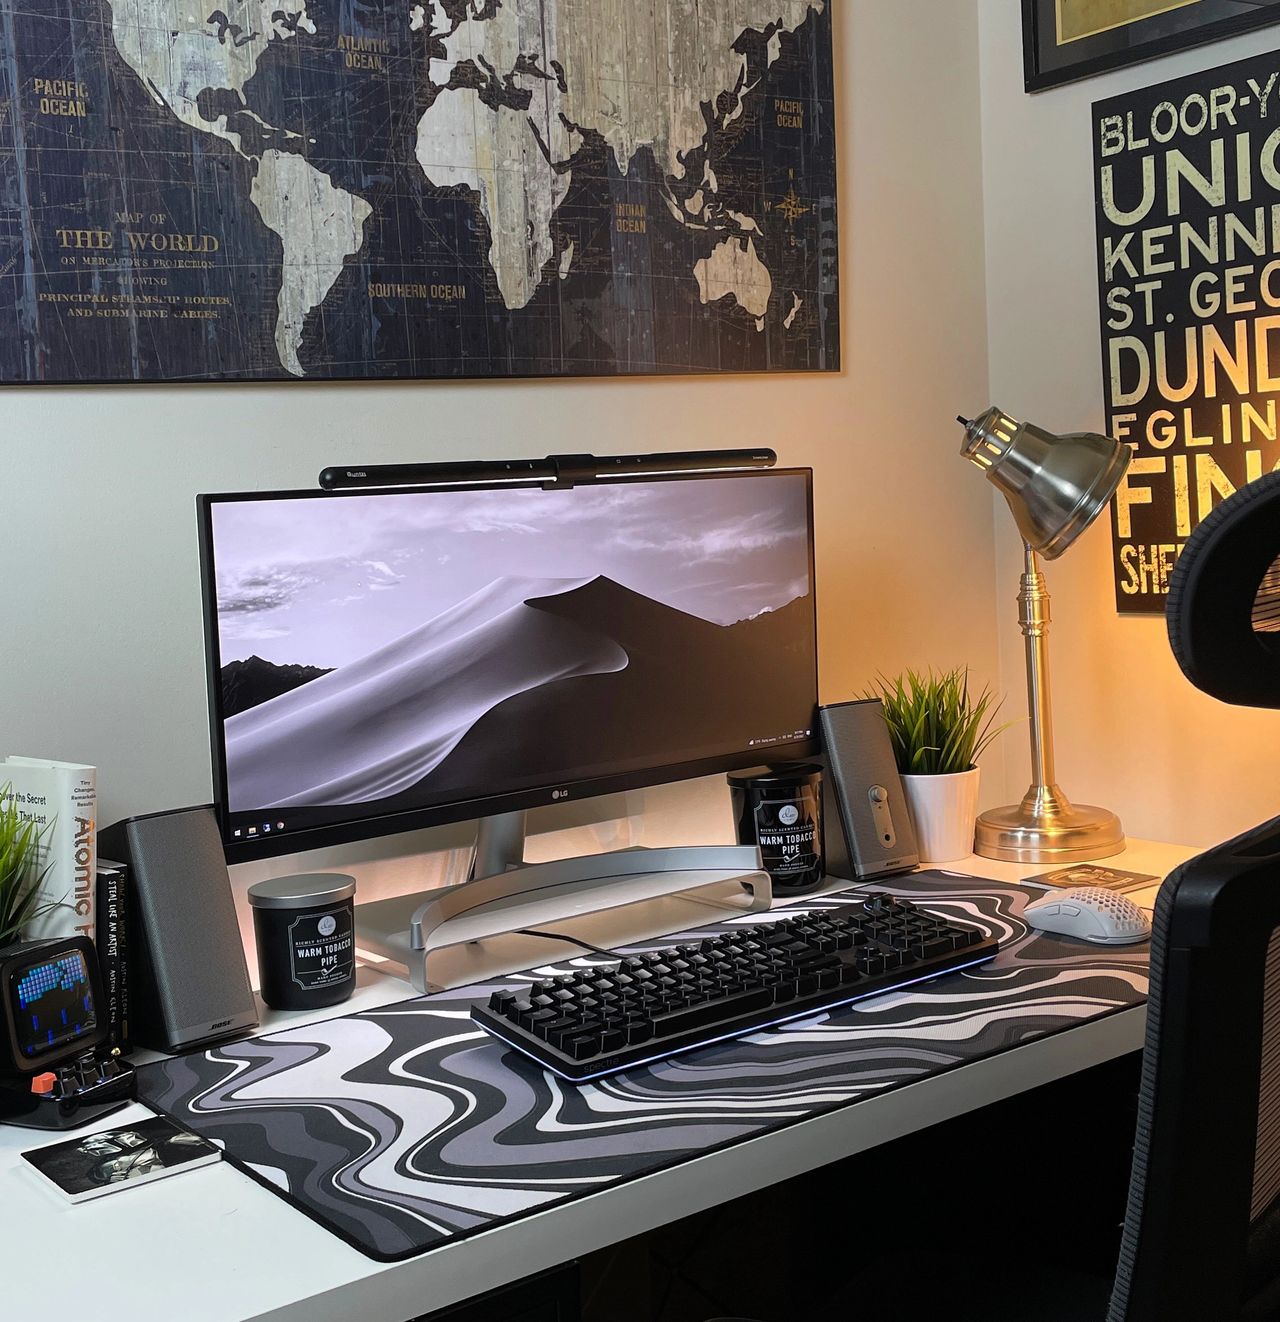 The Best 29" Ultrawide Monitor: First impression of the 29WN600-W